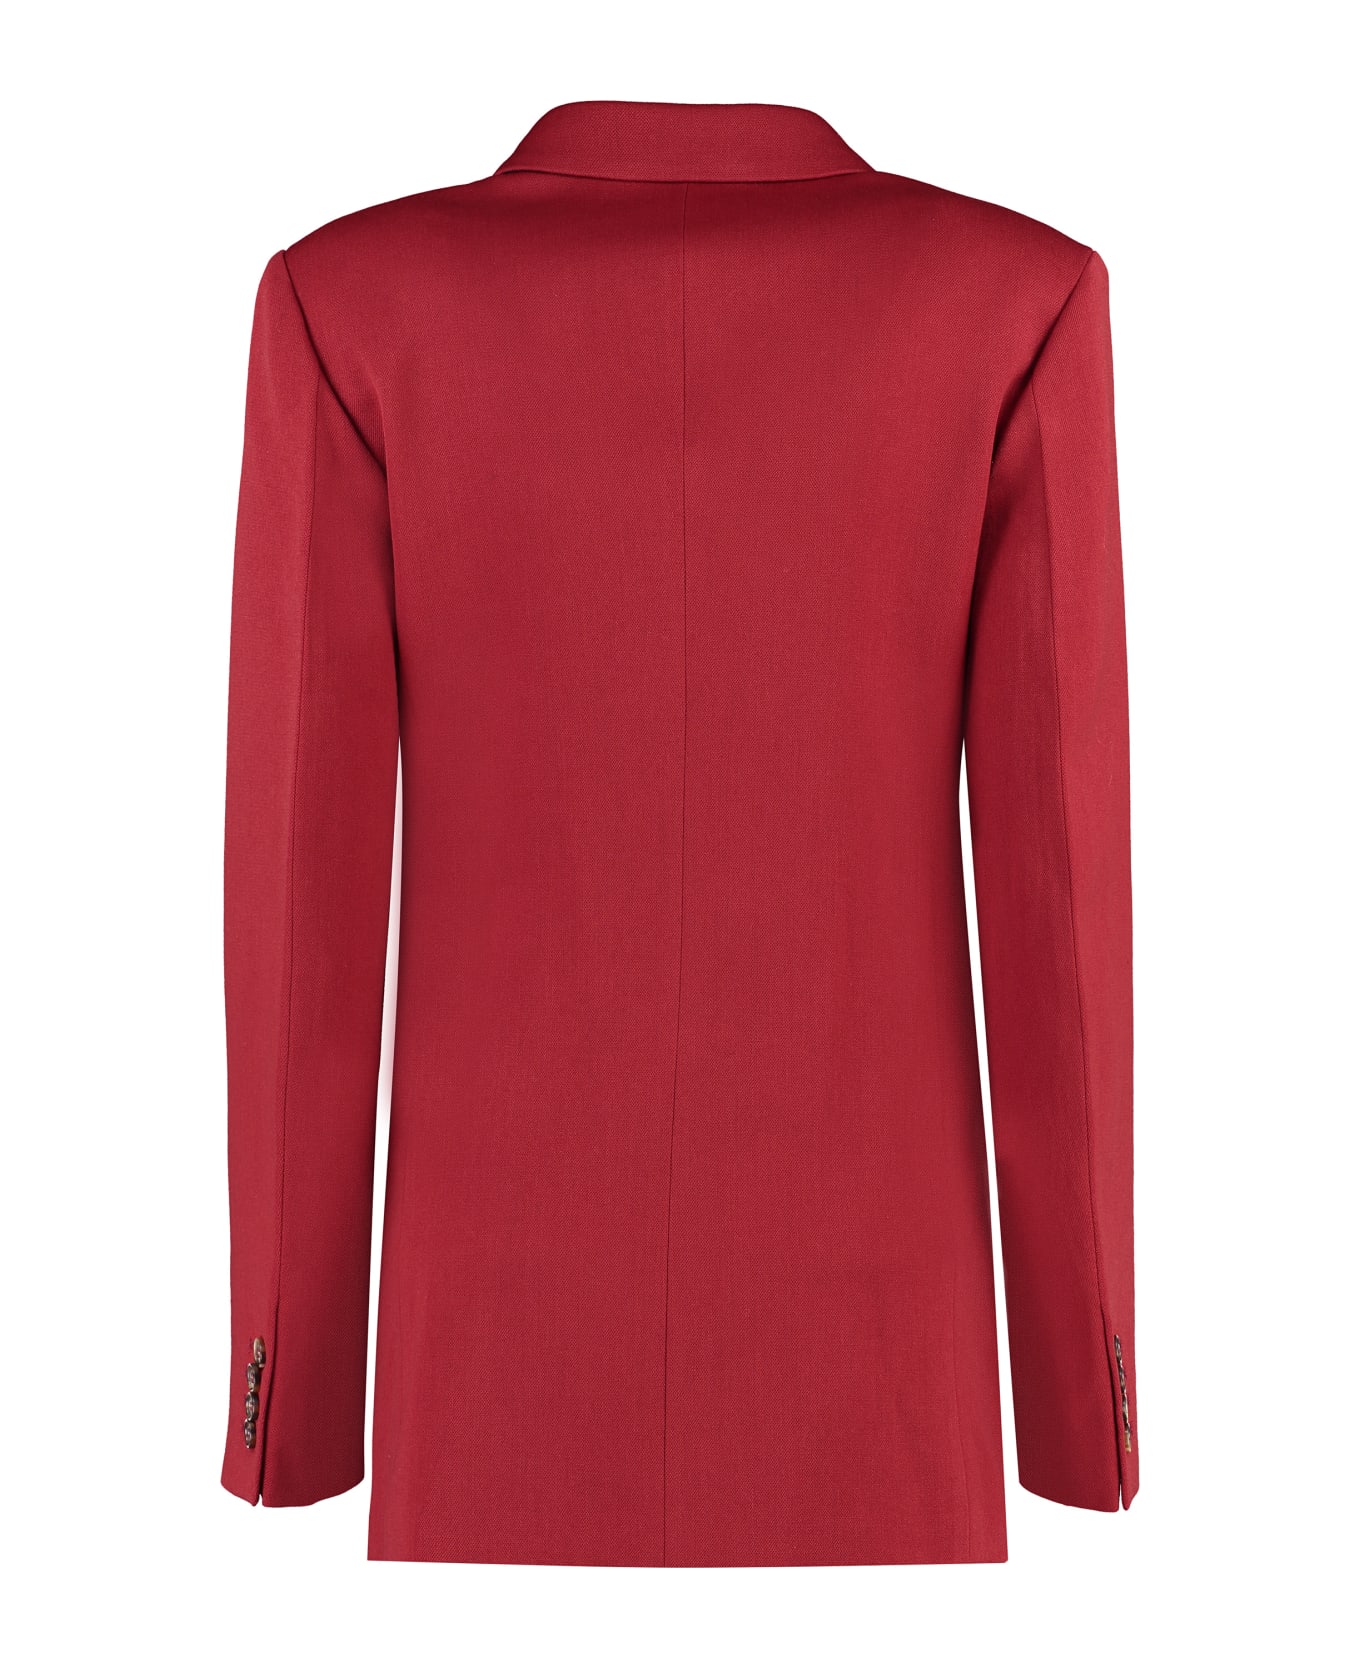 Victoria Beckham Double-breasted Wool Blazer - red